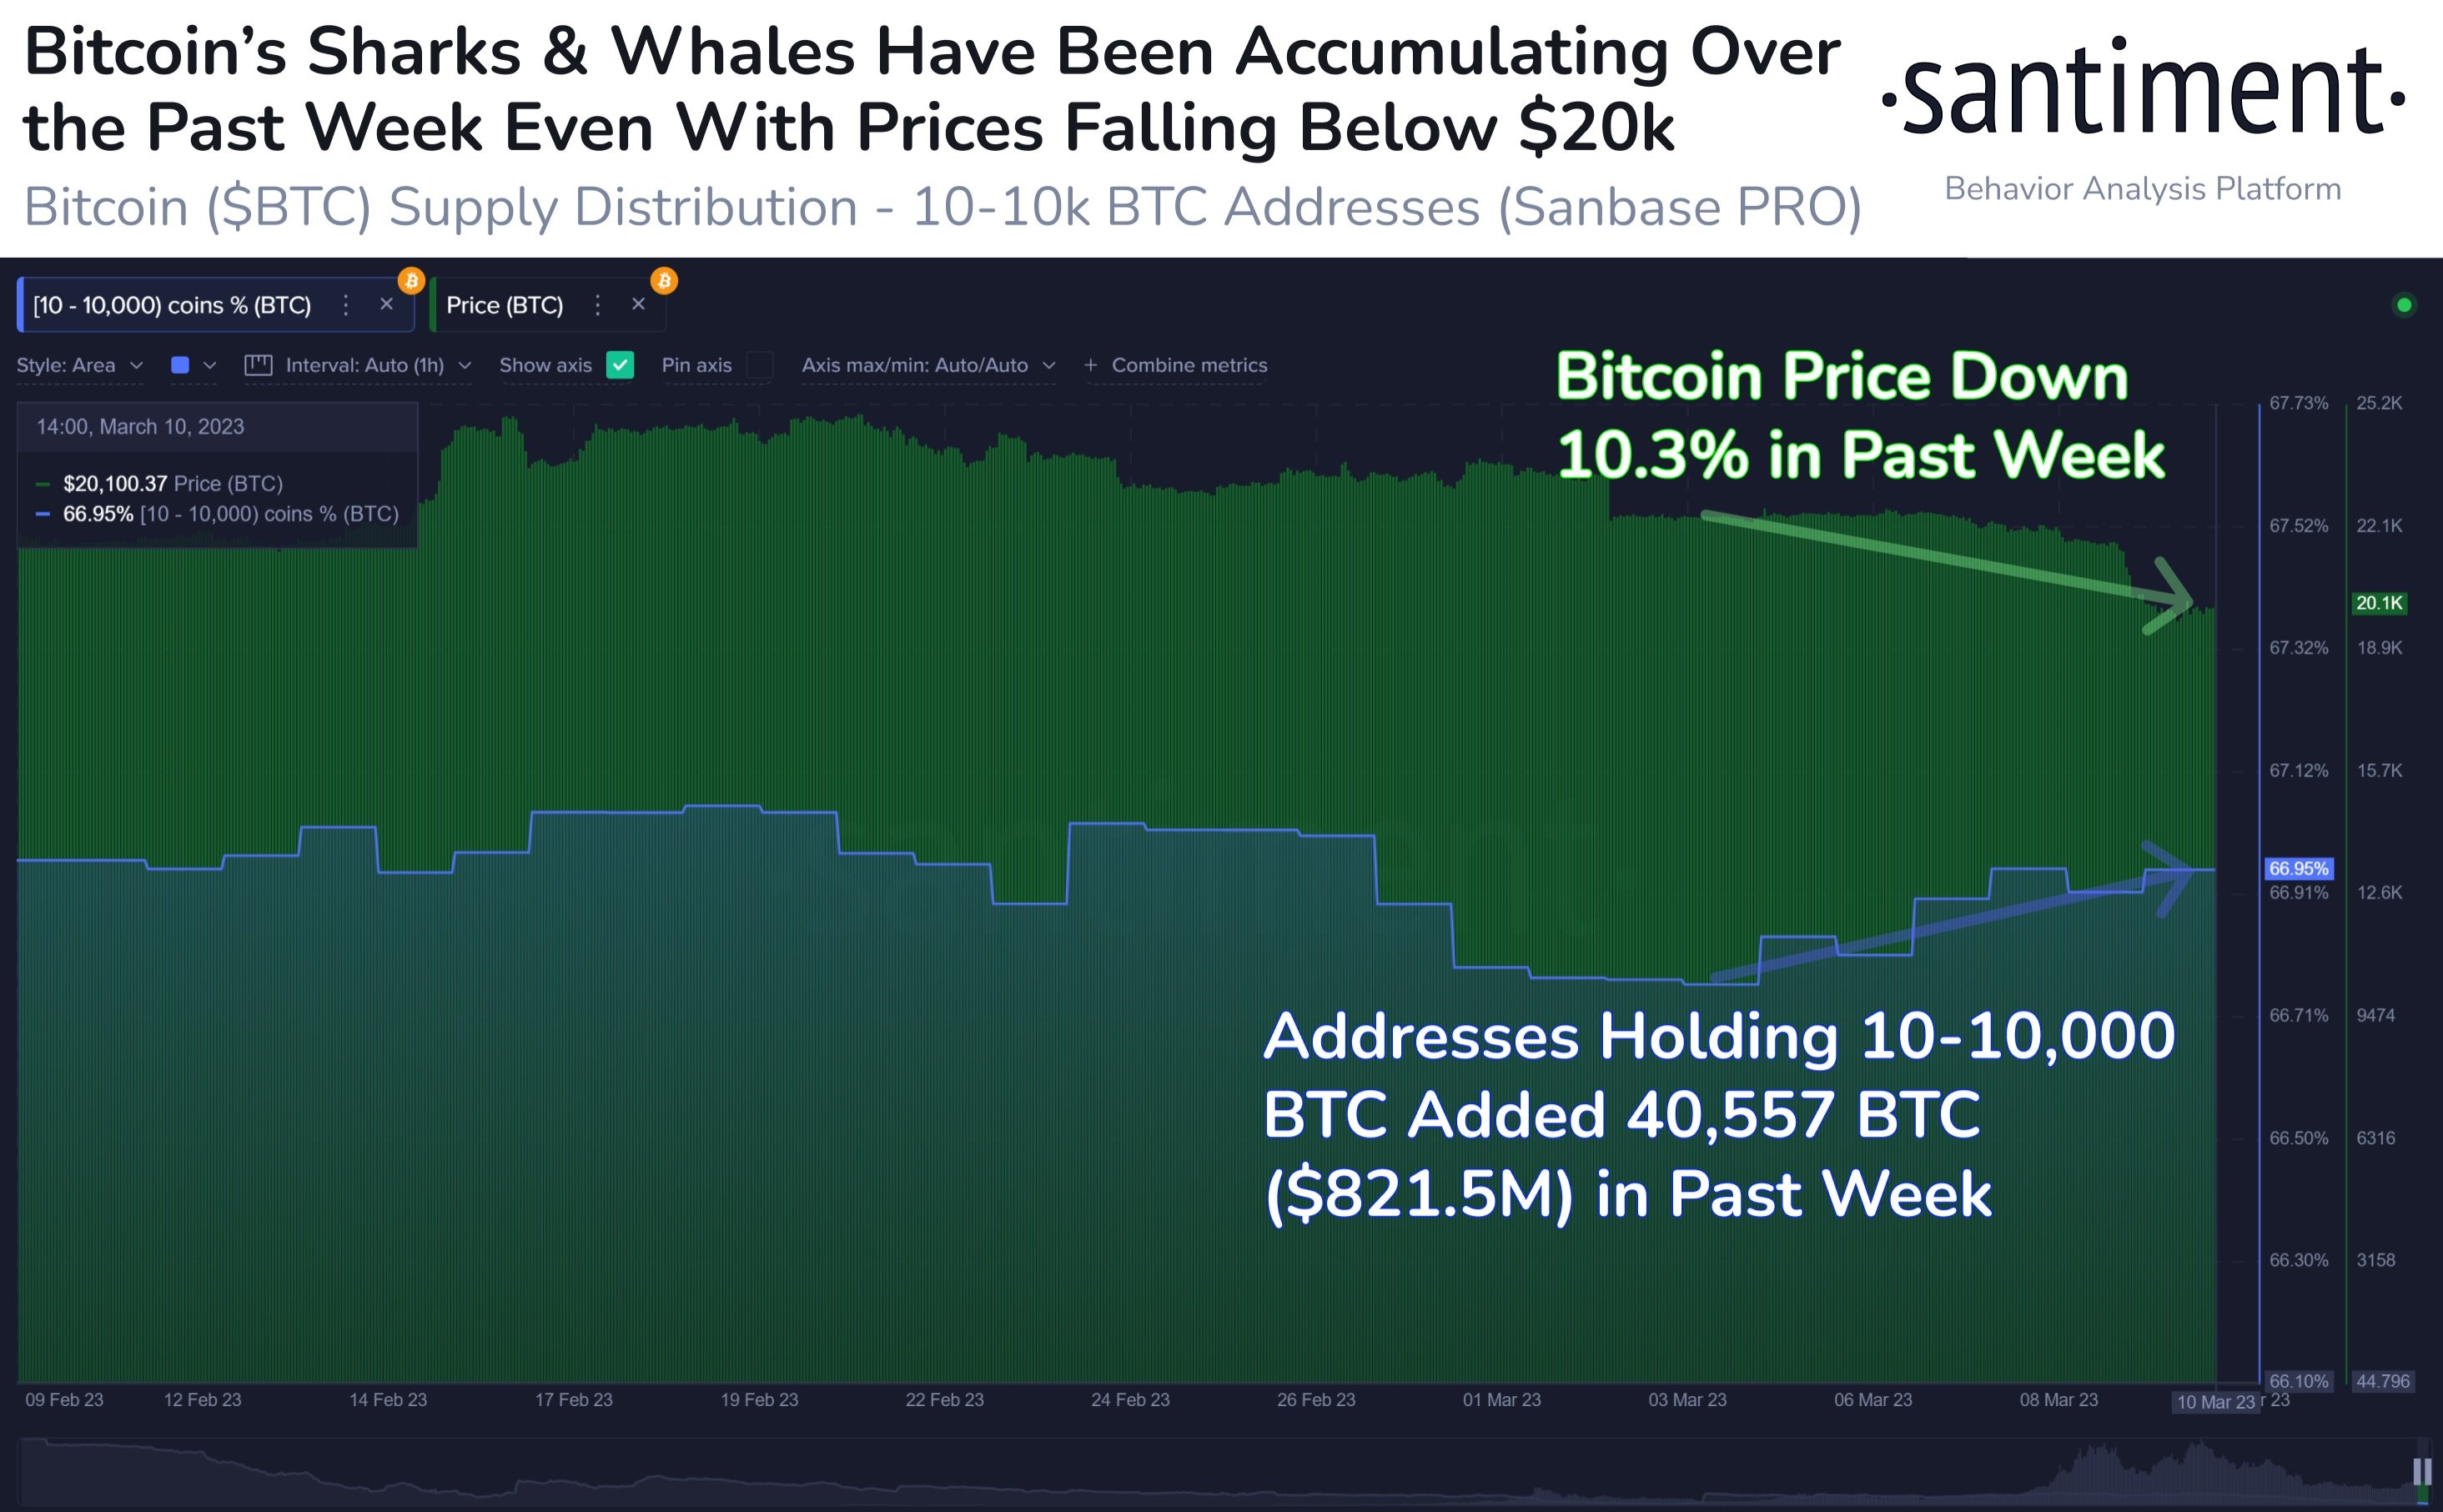 Market Research Report: Crypto Prices Jump After Huge Spike in Coinbase Premium - BTC whales buy